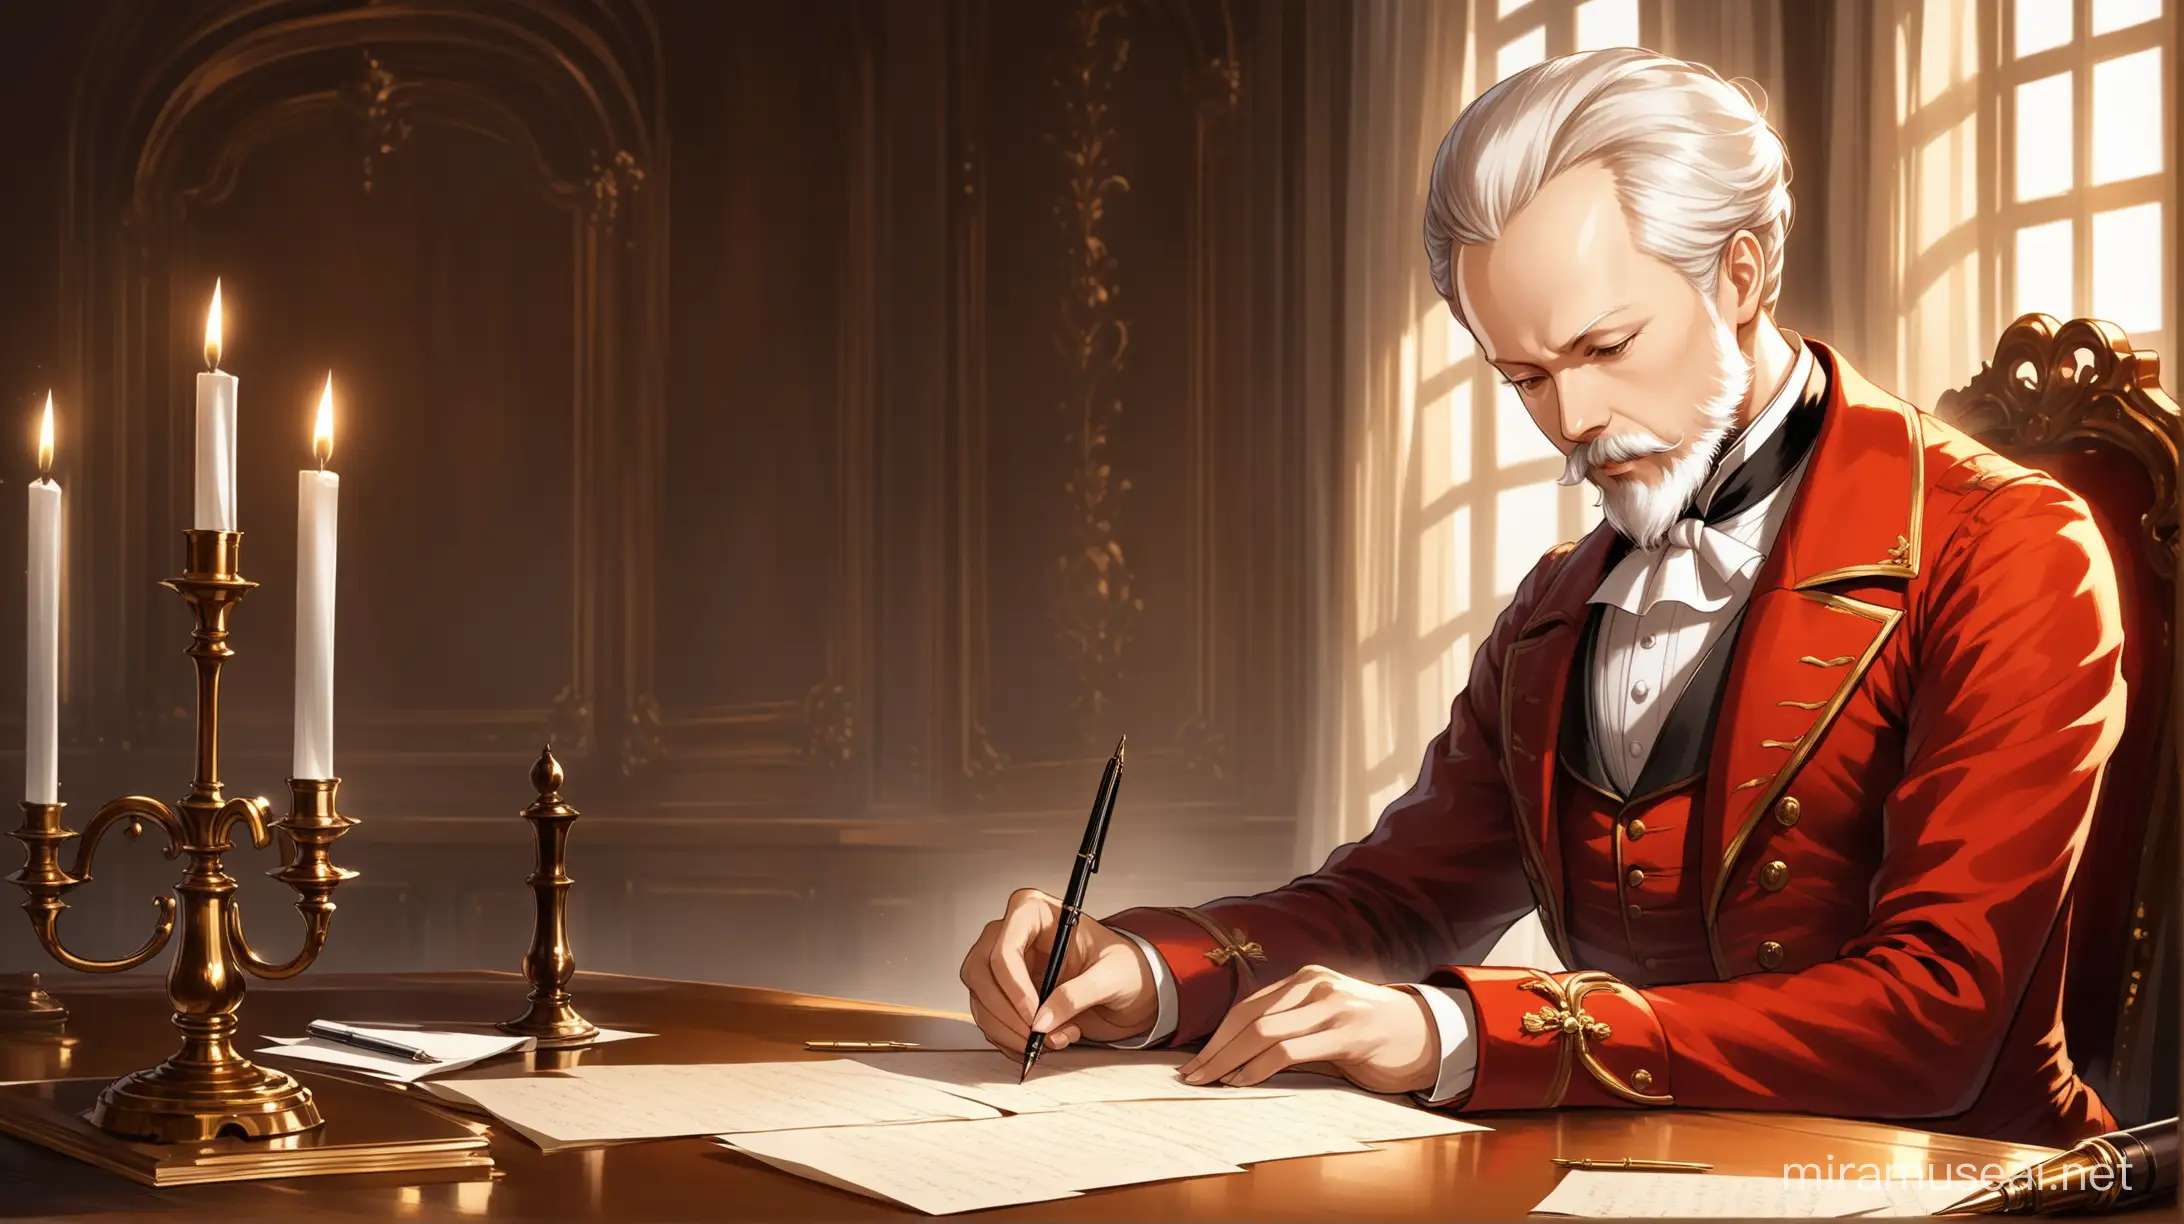 Composer Tchaikovsky Writing Musical Scores in Baroquestyle Room